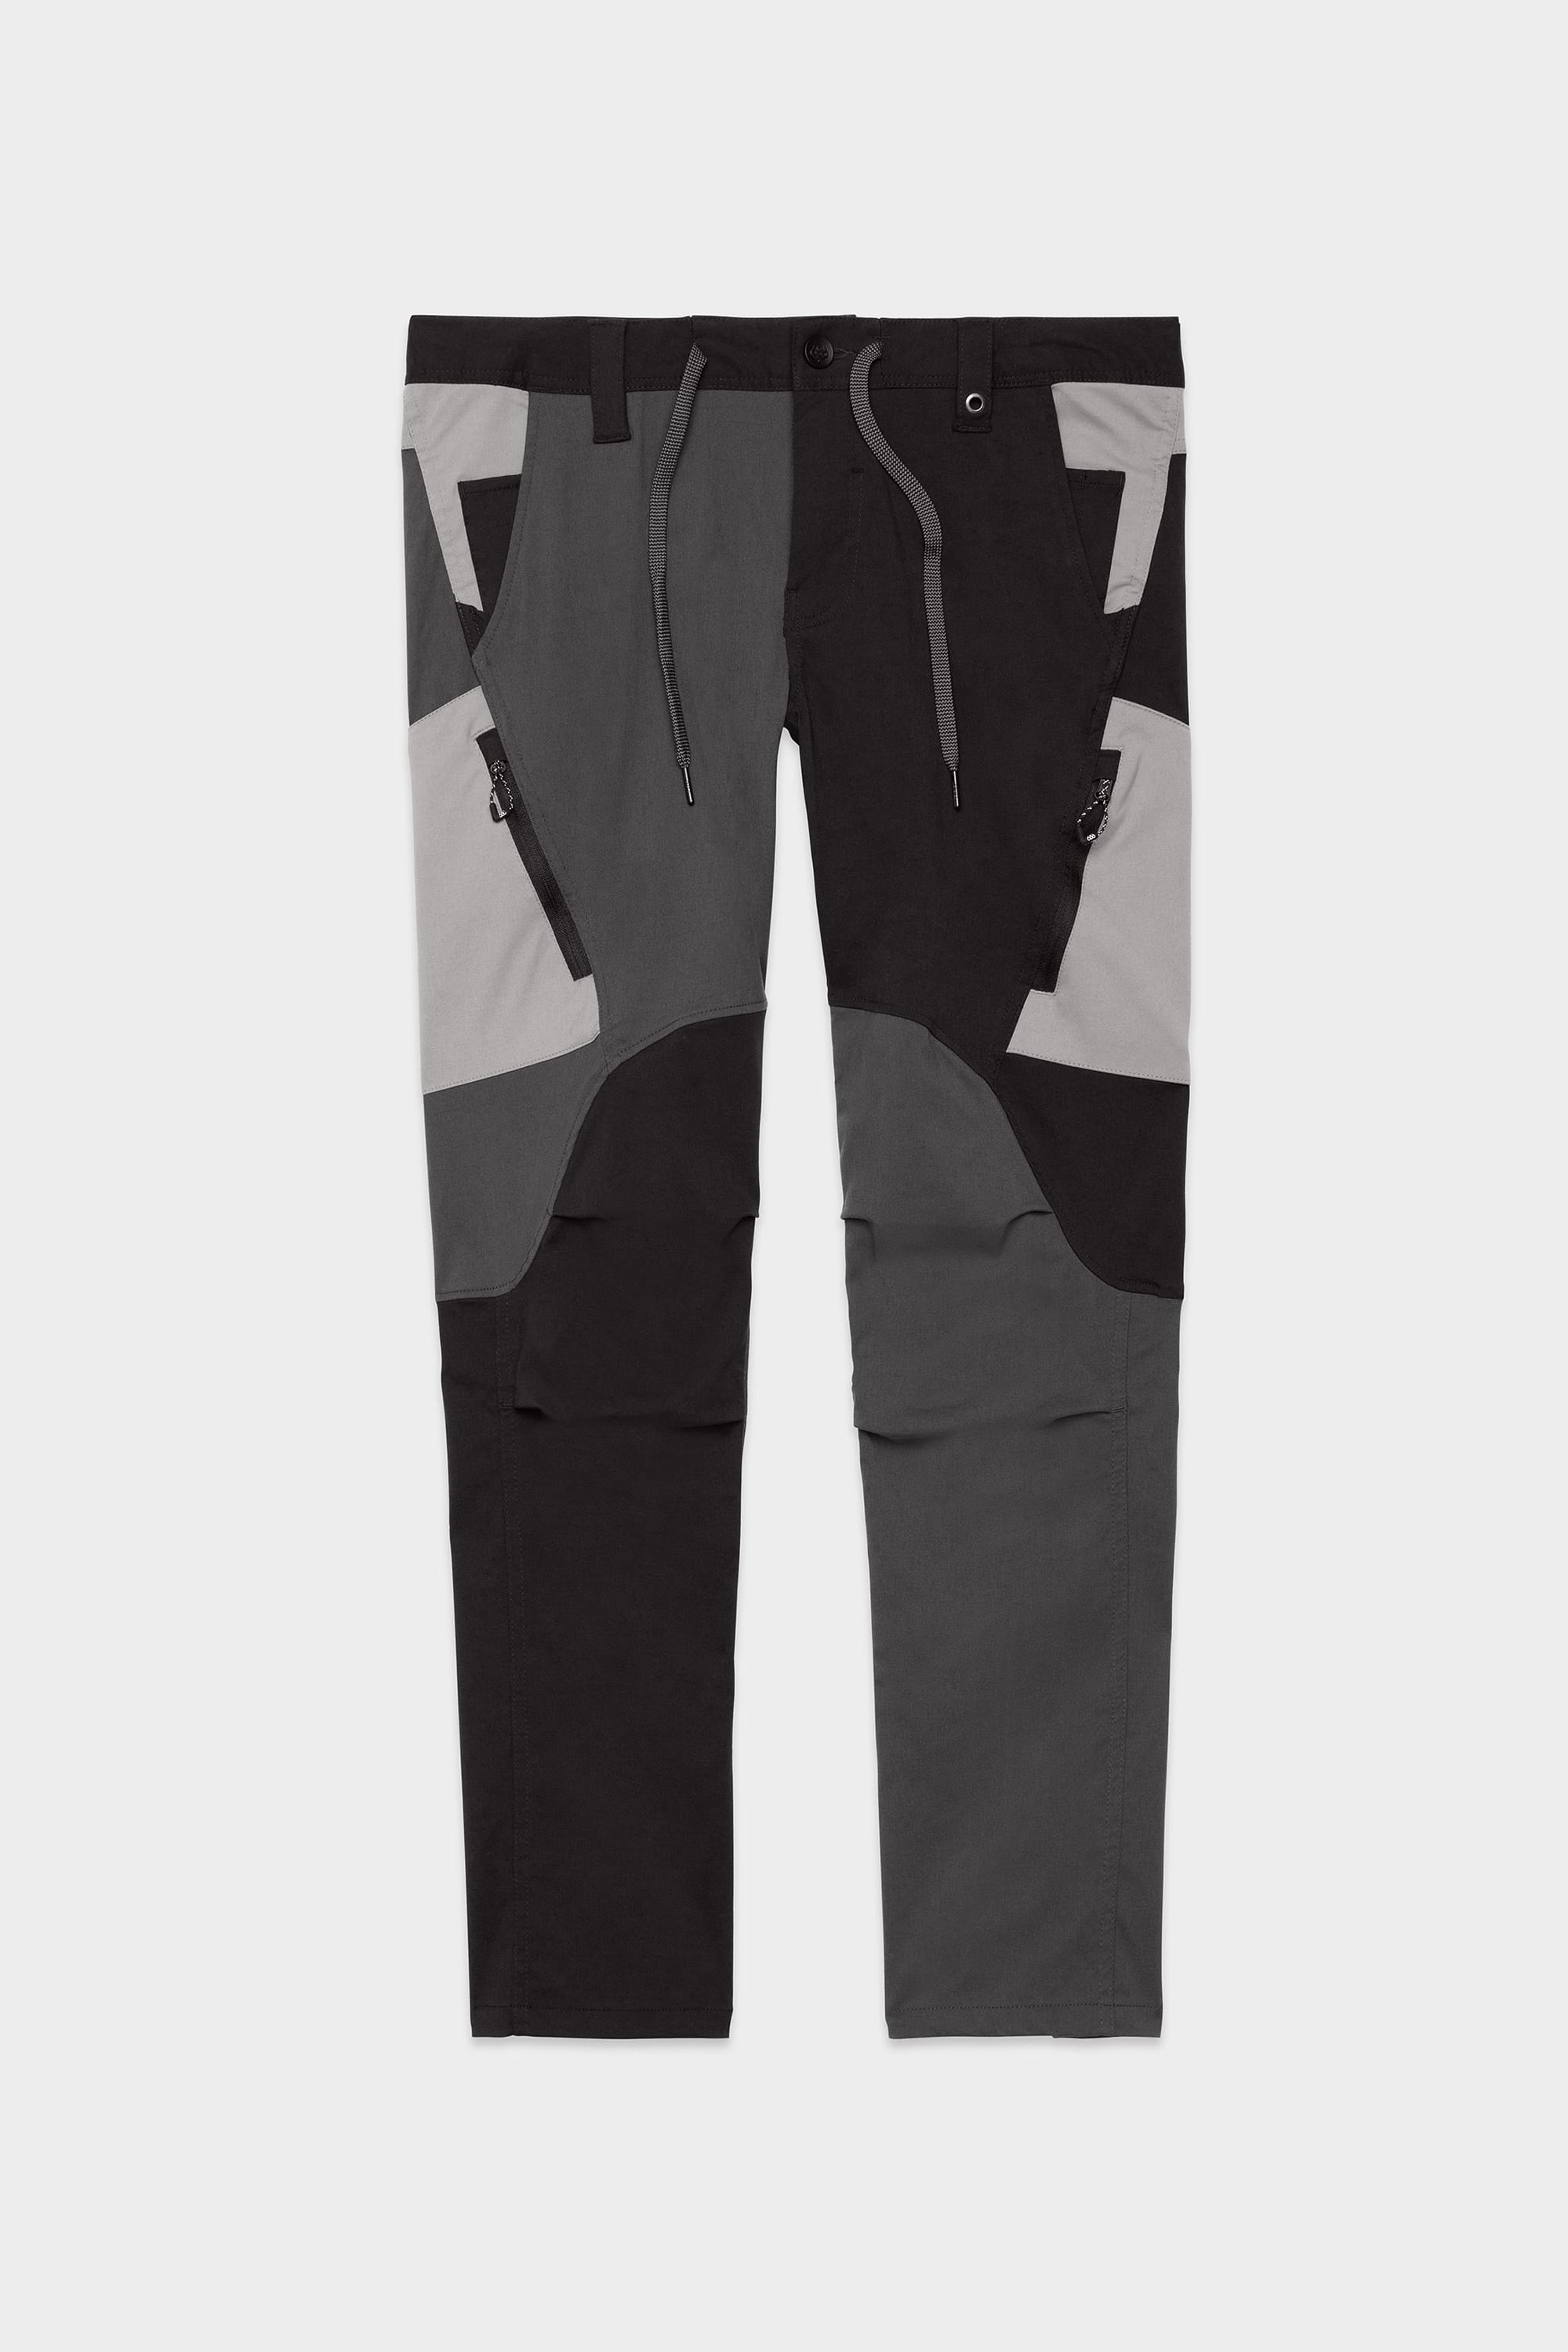 Alternate View 37 of 686 Men's Anything Cargo Pant - Slim Fit